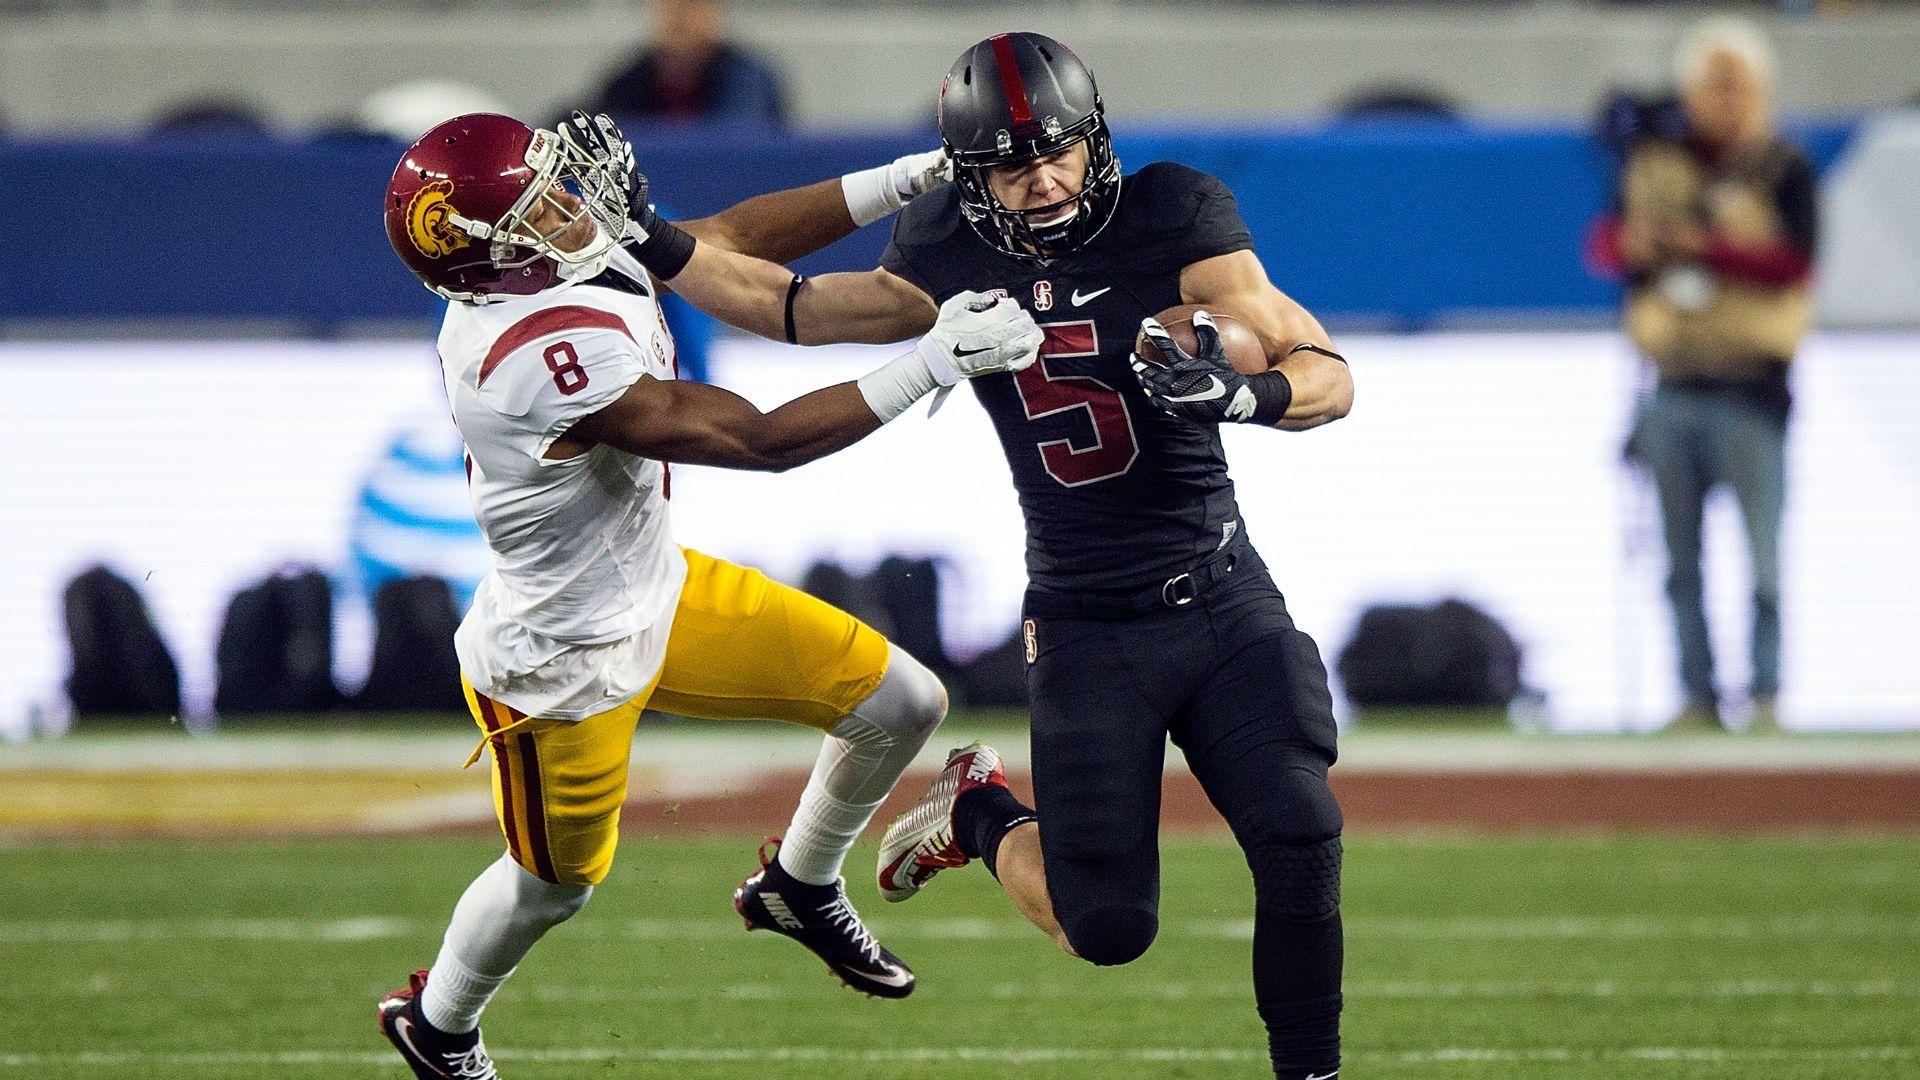 Stanford USC 22: Five things we learned